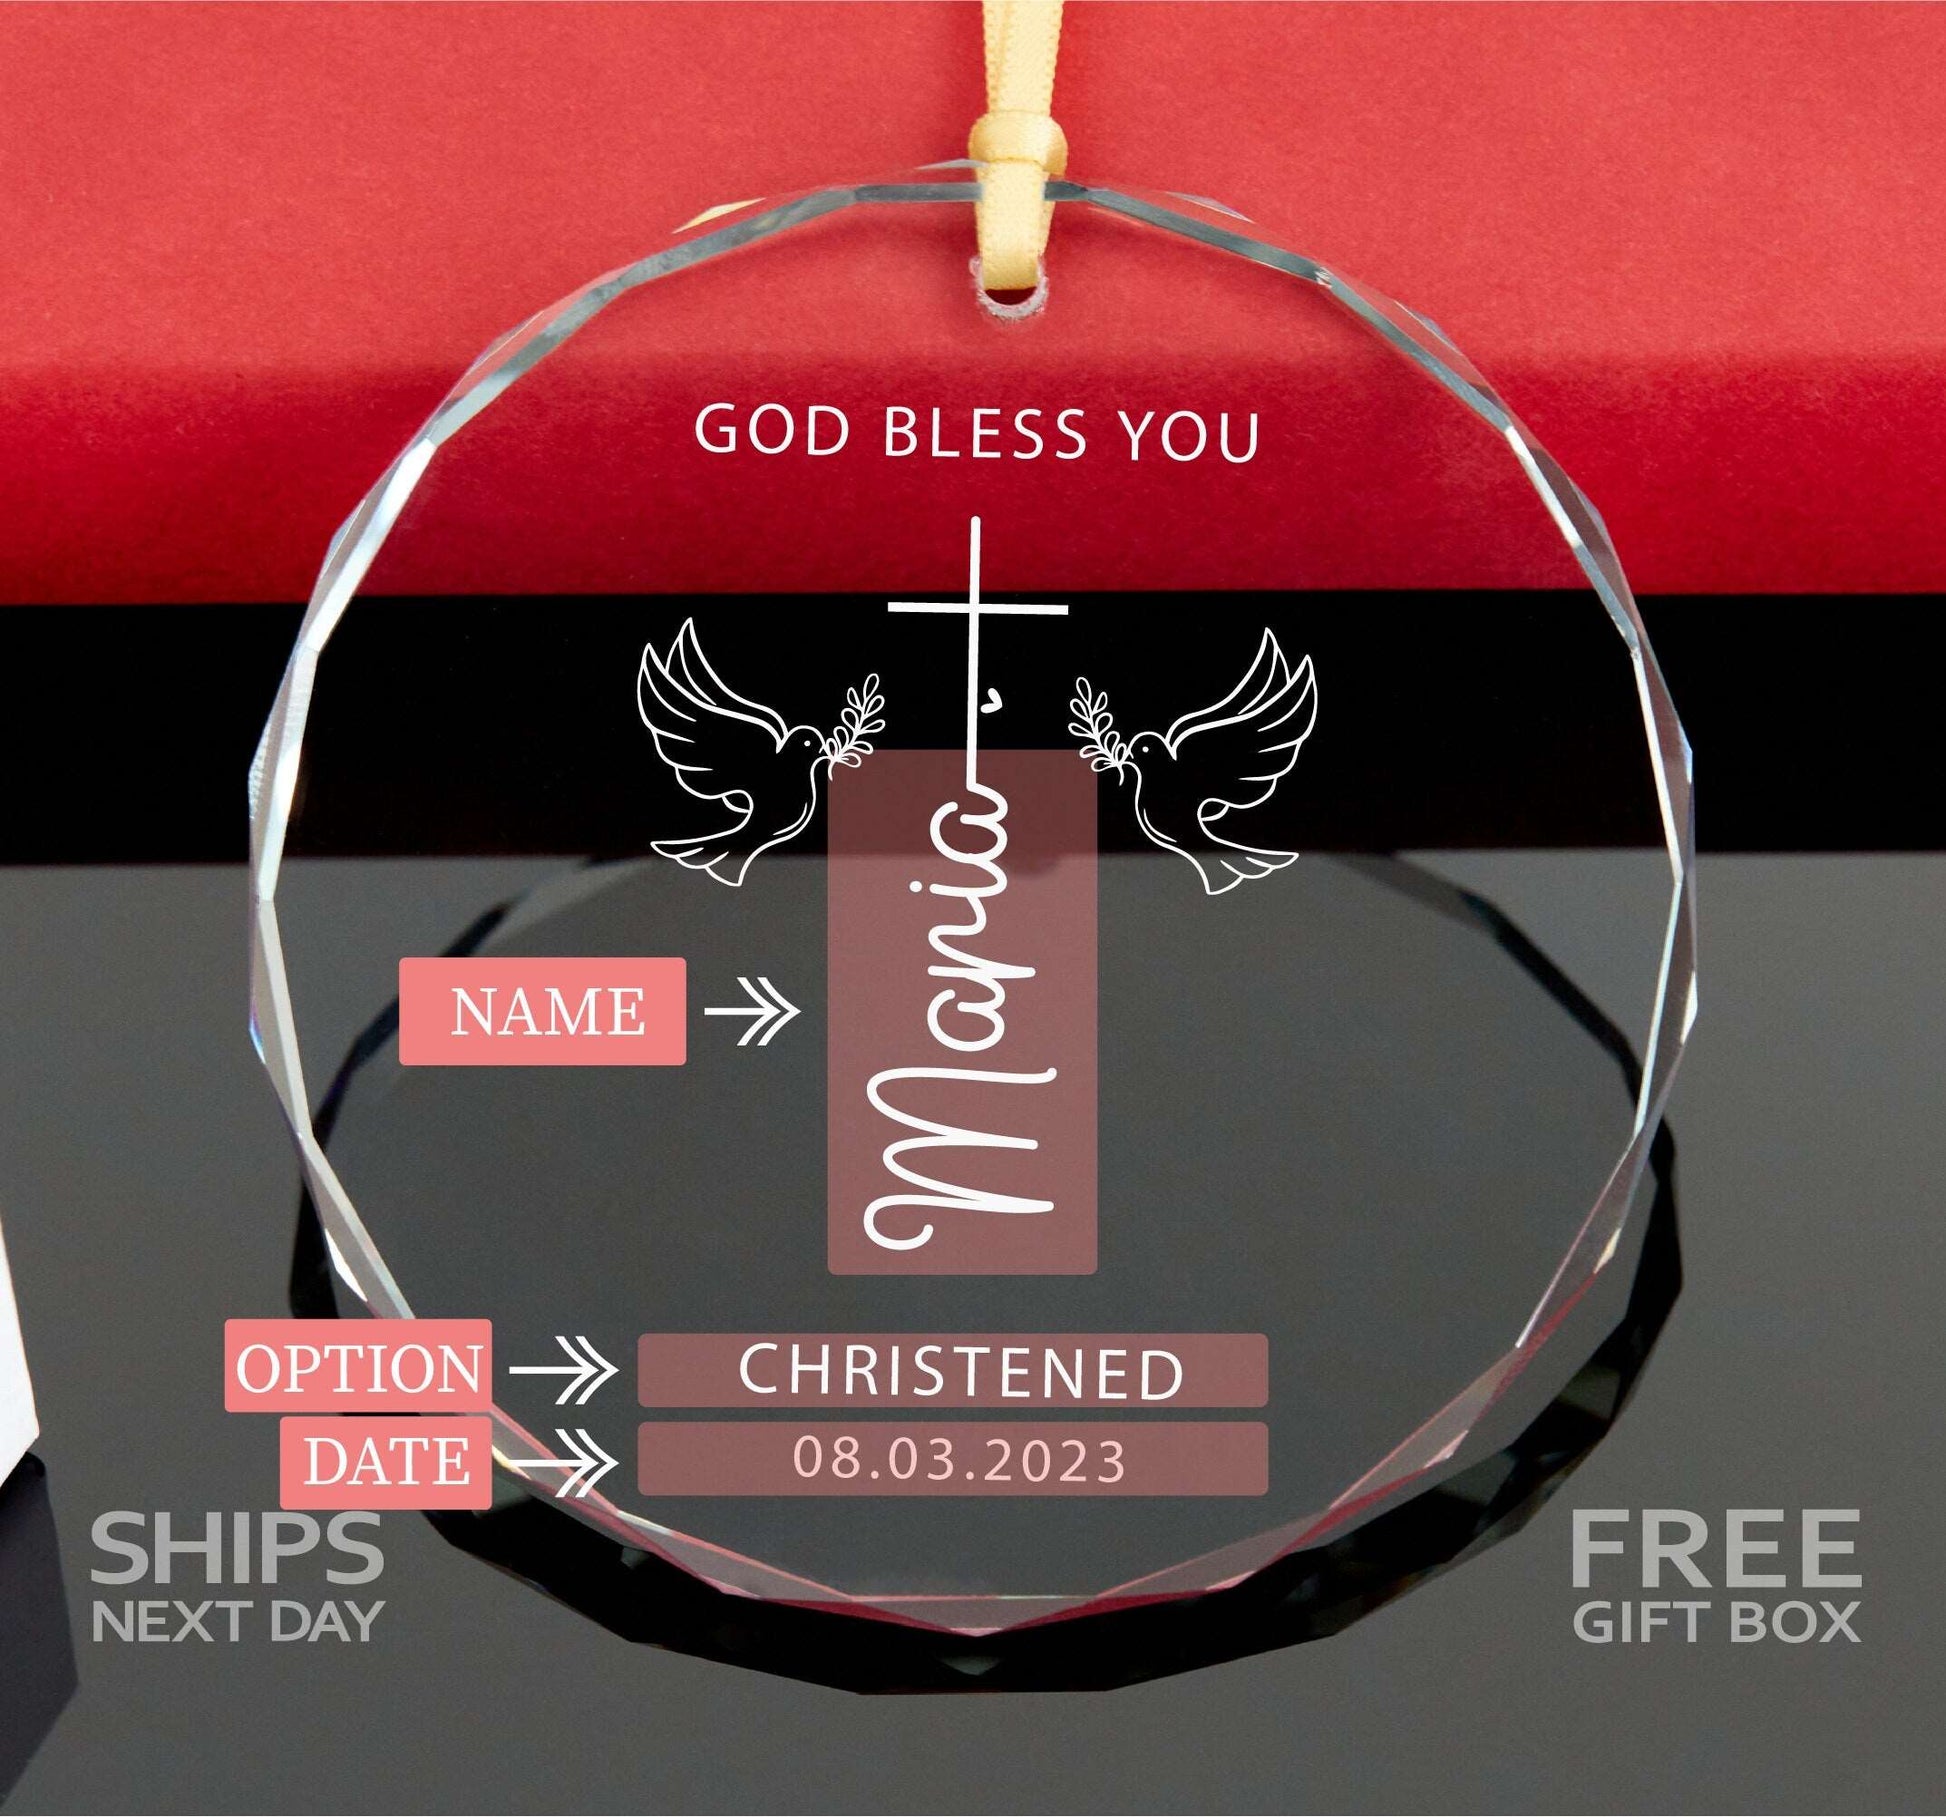 a glass ornament with a cross and doves on it